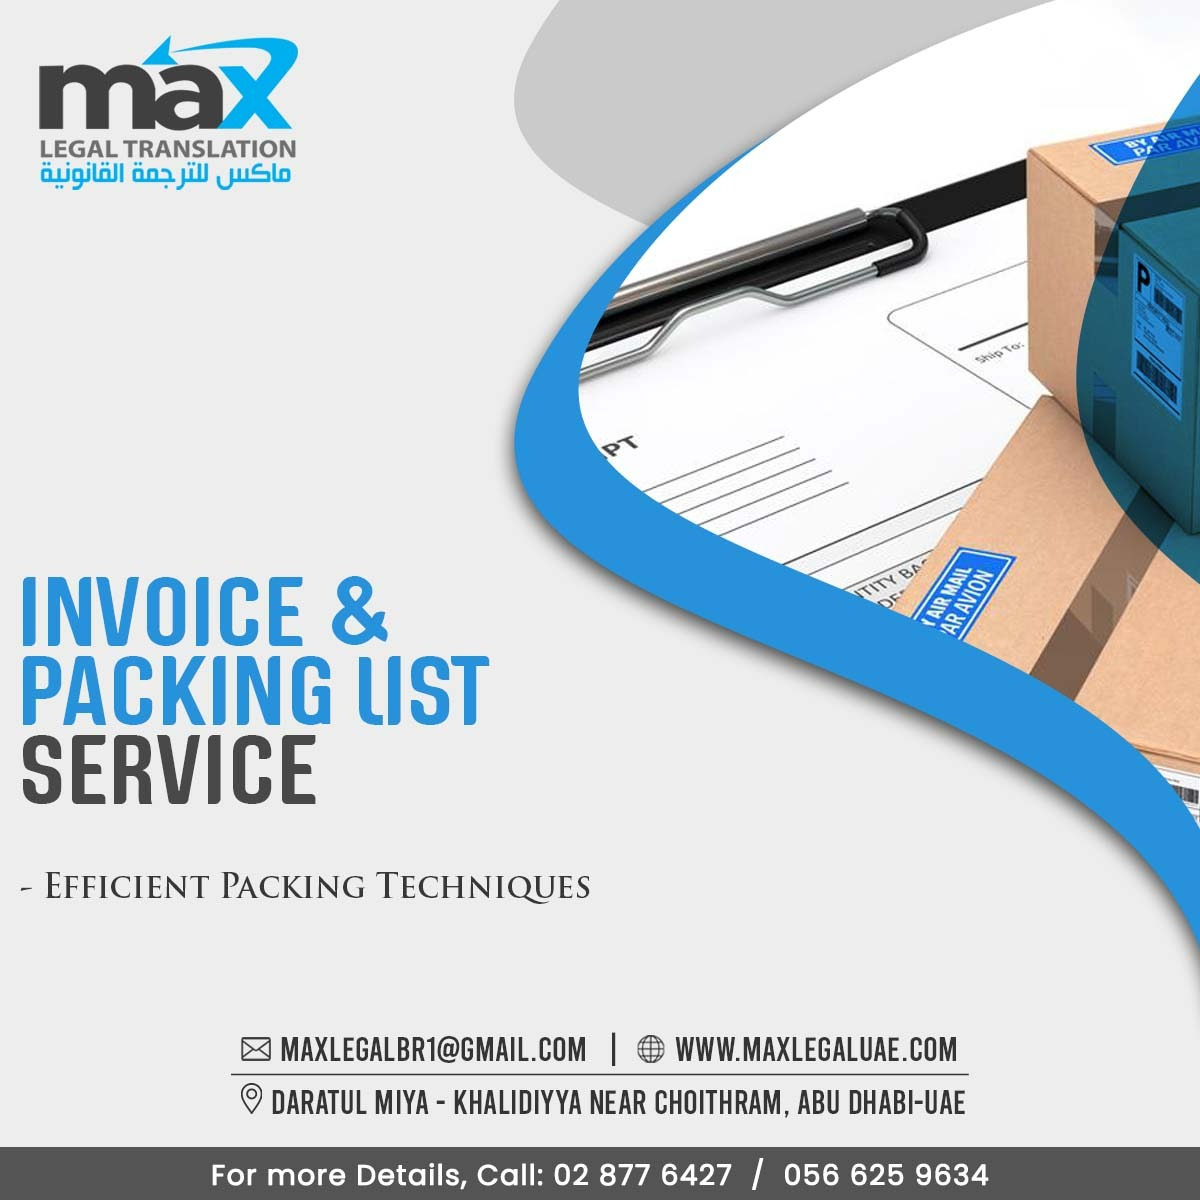 🚀 Ready to supercharge your business? 💼 Boost efficiency and professionalism with our top-notch invoice and packing list service! 📦💰

#BusinessSolutions #InvoiceServices #PackingListPro #EfficiencyMatters #SmallBusinessHacks #ProfessionalTools #SimplifyBusiness #TimeSaver